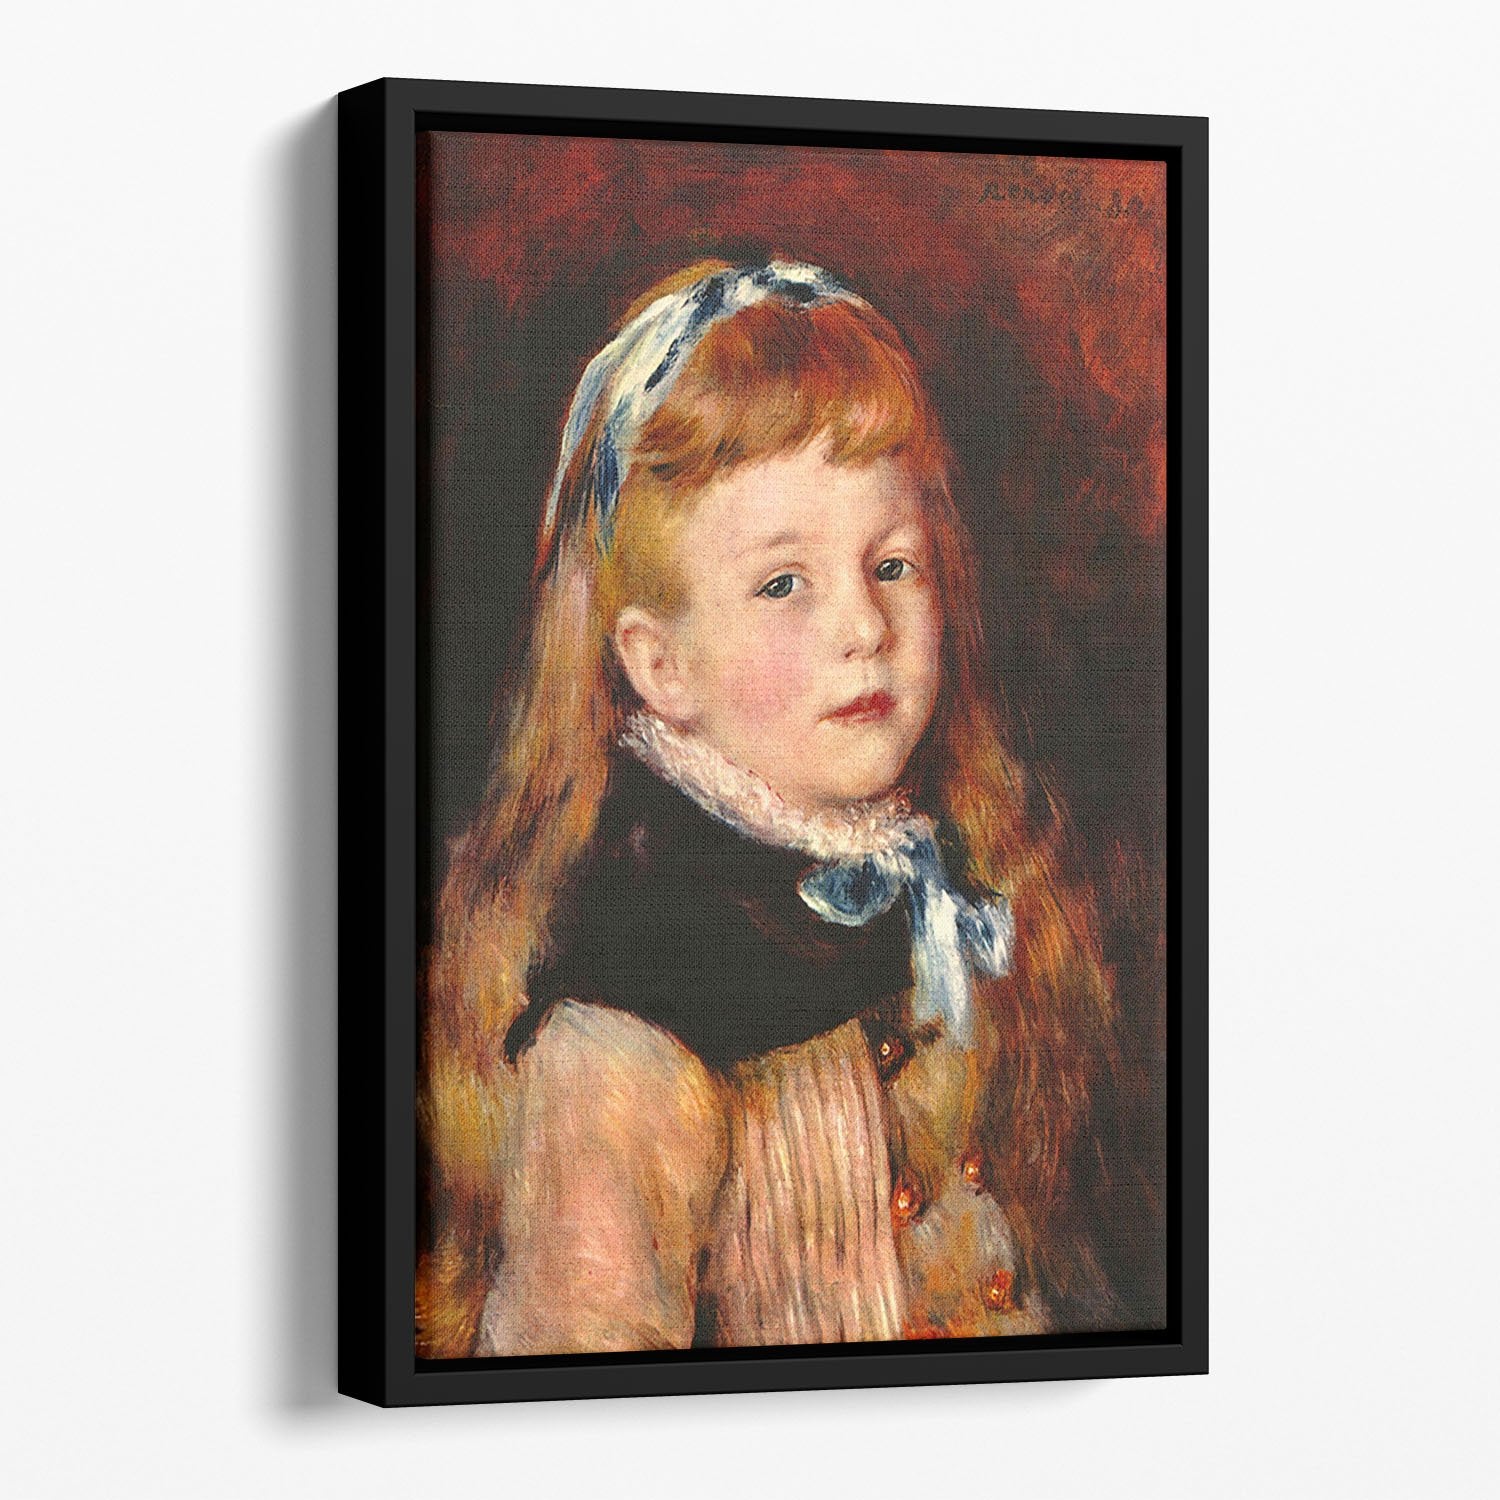 Mademoiselle Grimprel with blue hair band by Renoir Floating Framed Canvas